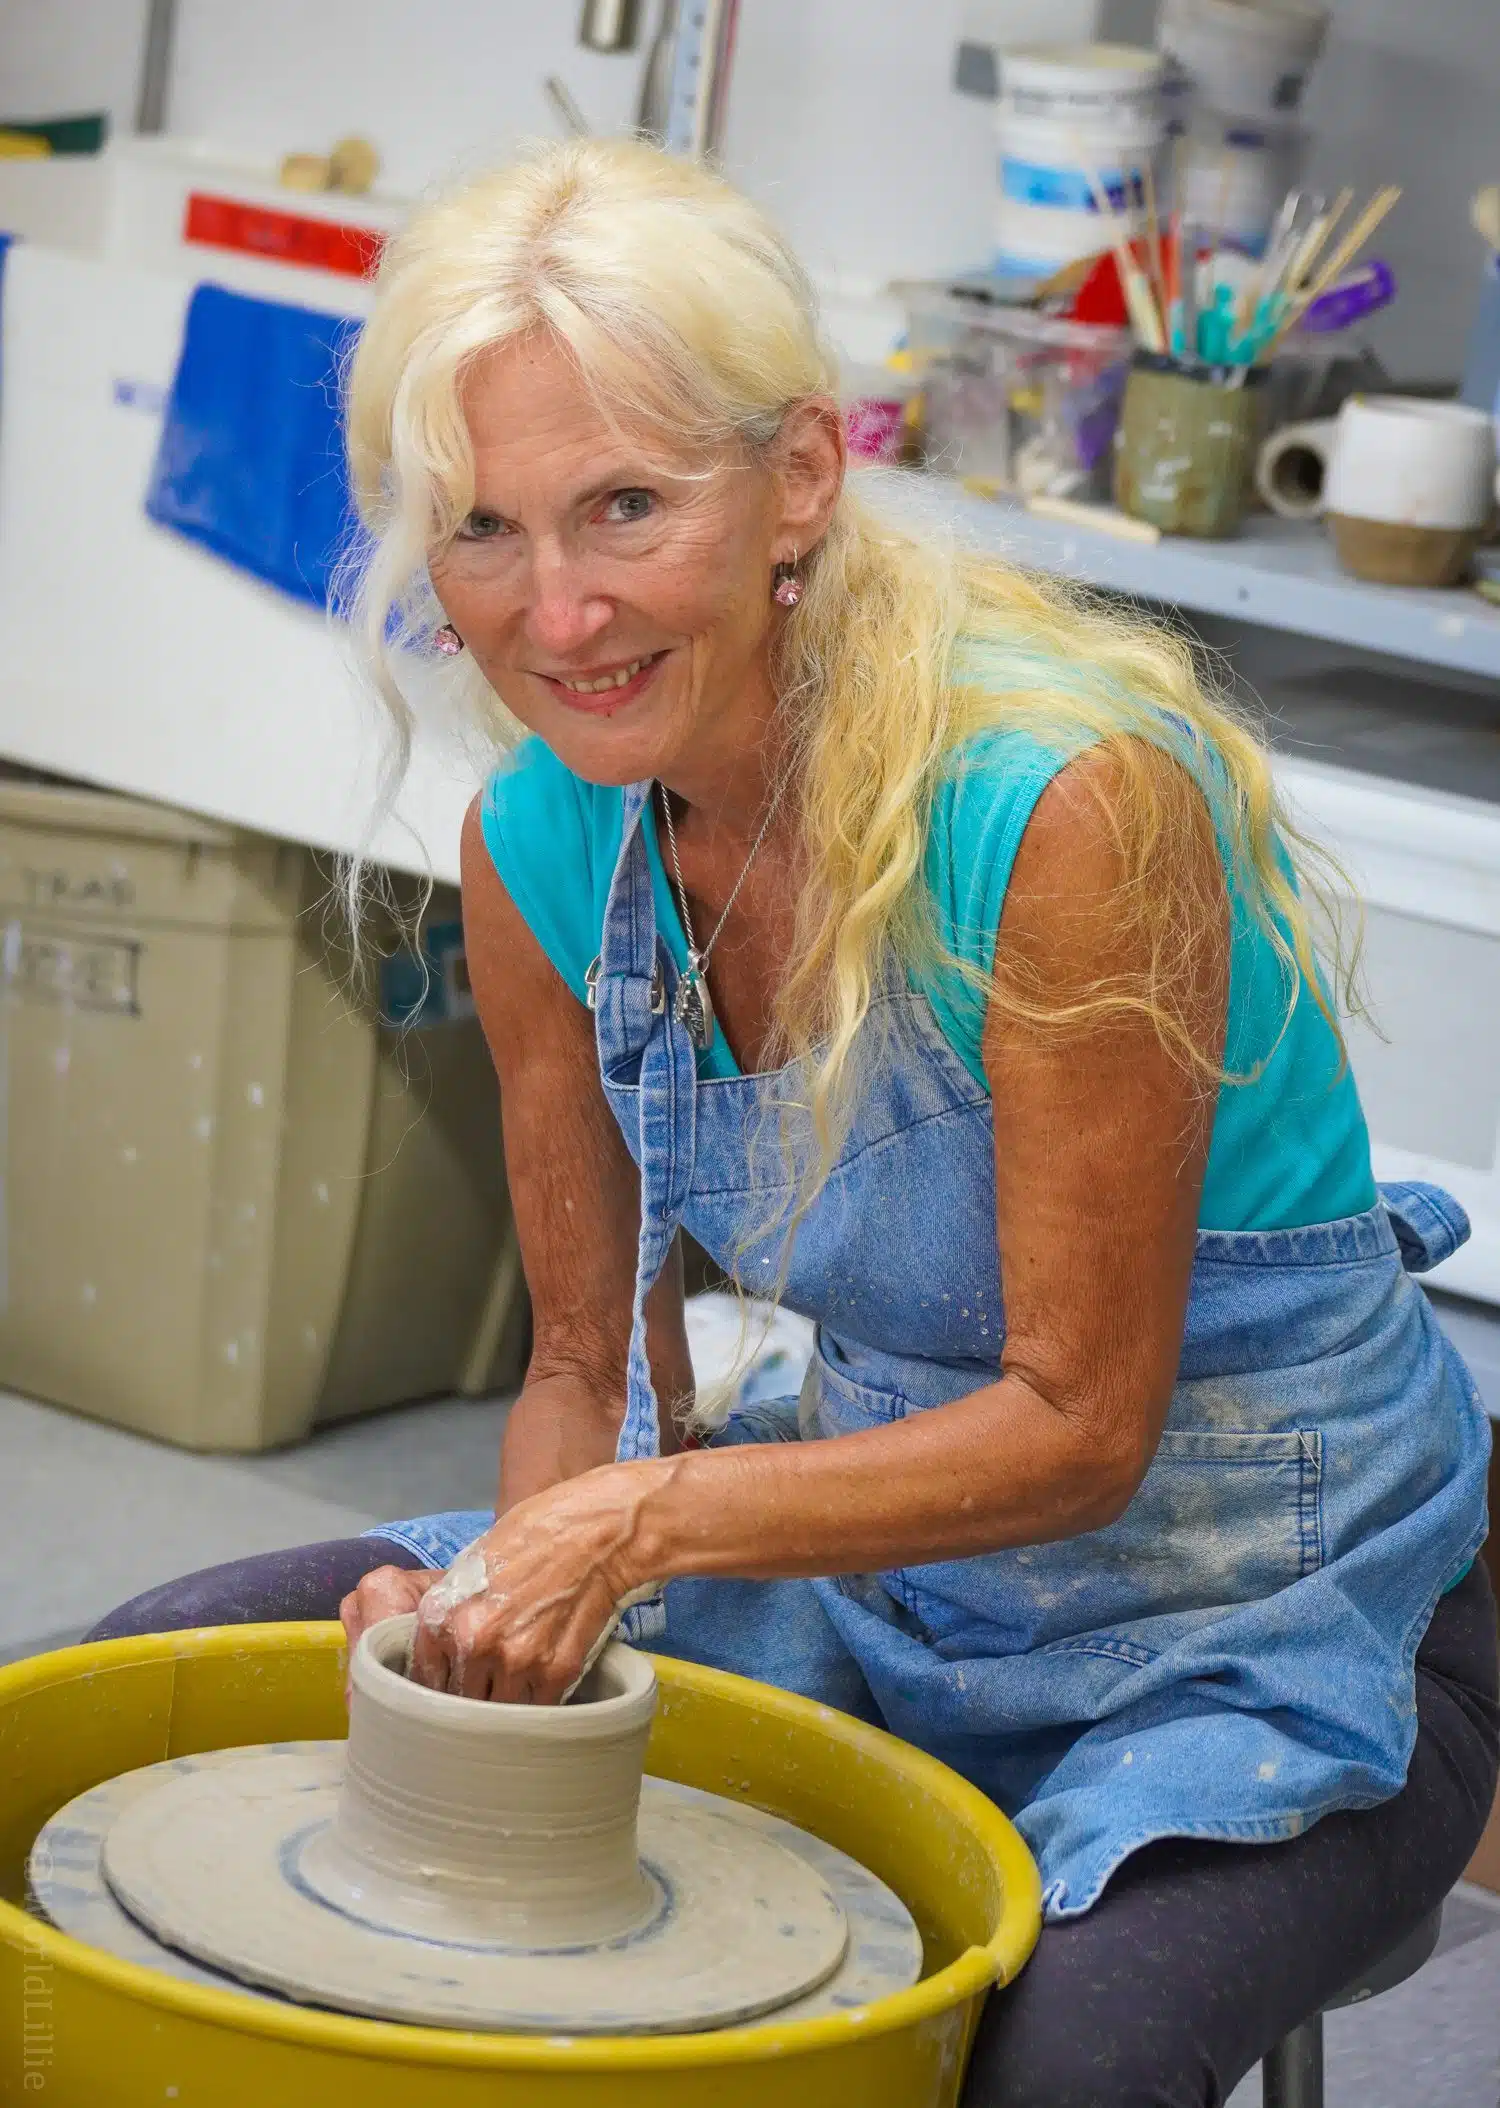 Alexis offers pottery classes in the lower floor.